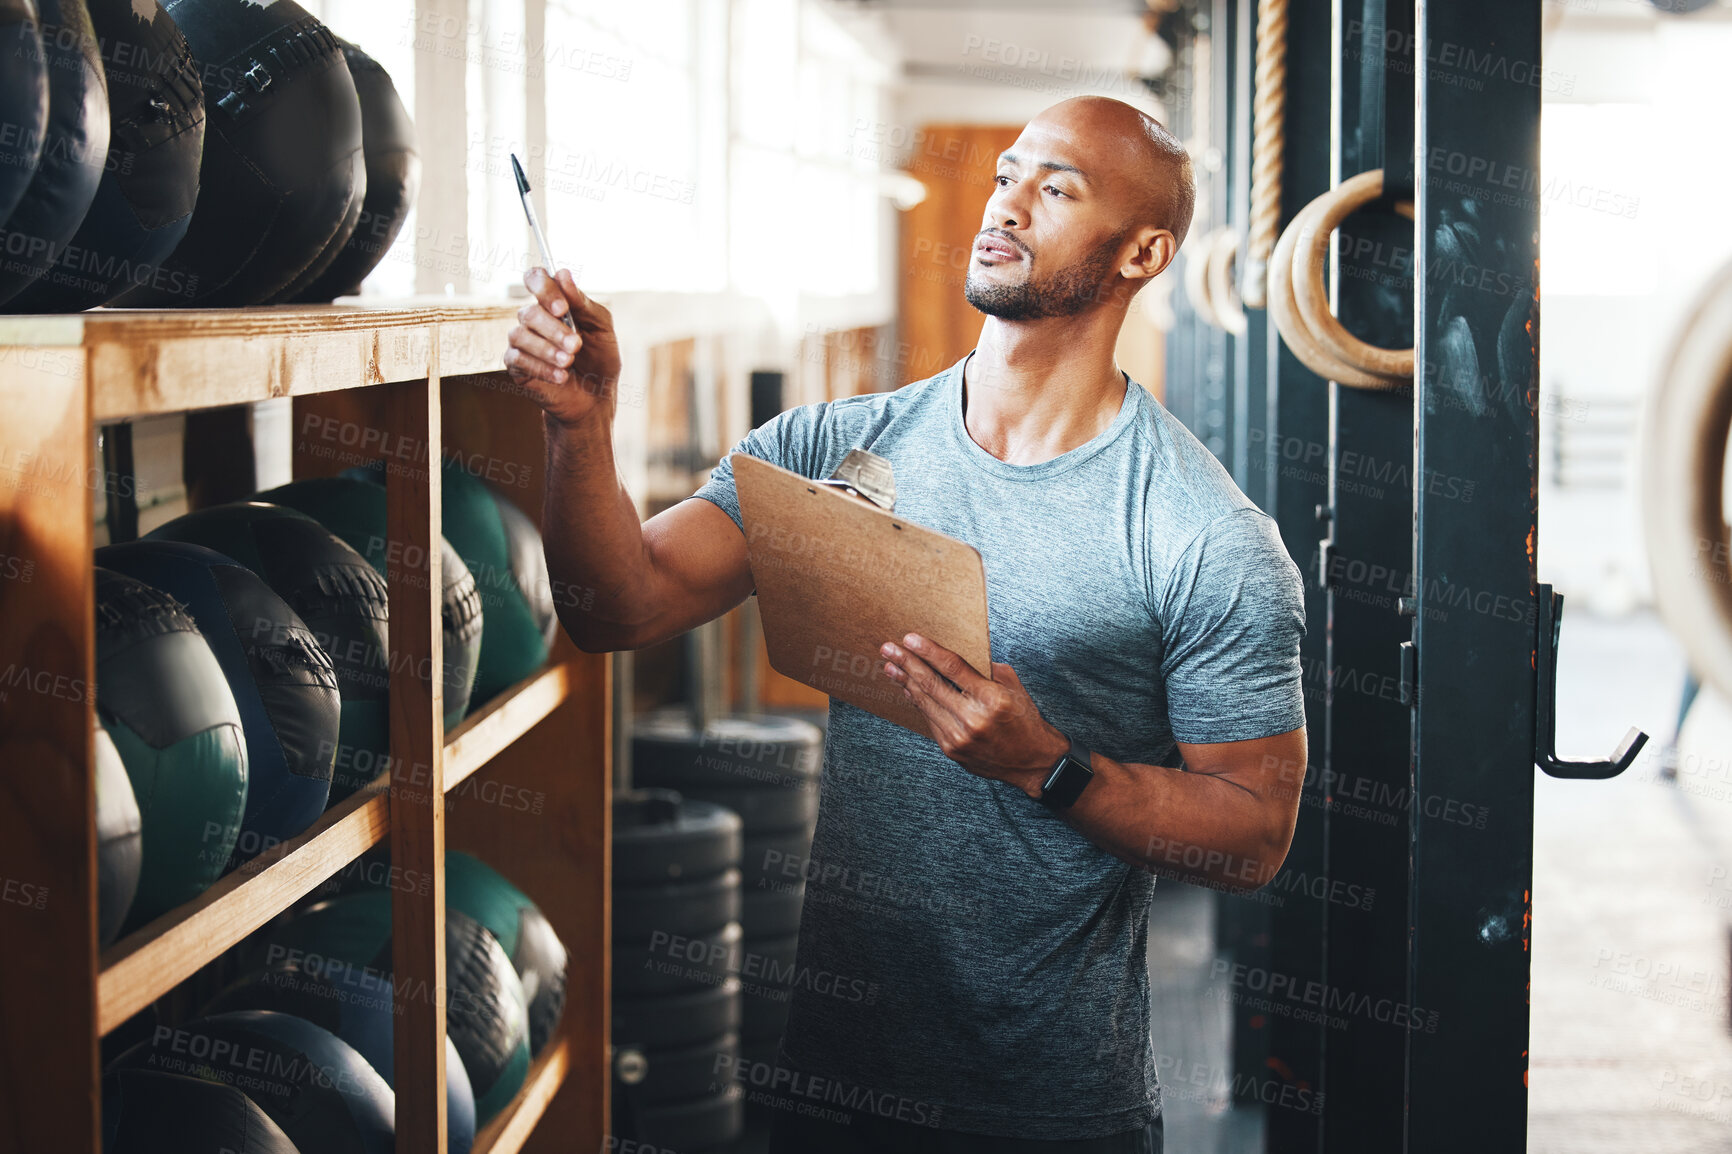 Buy stock photo Shot of a muscular young man using a clipboard while checking equipment in a gym